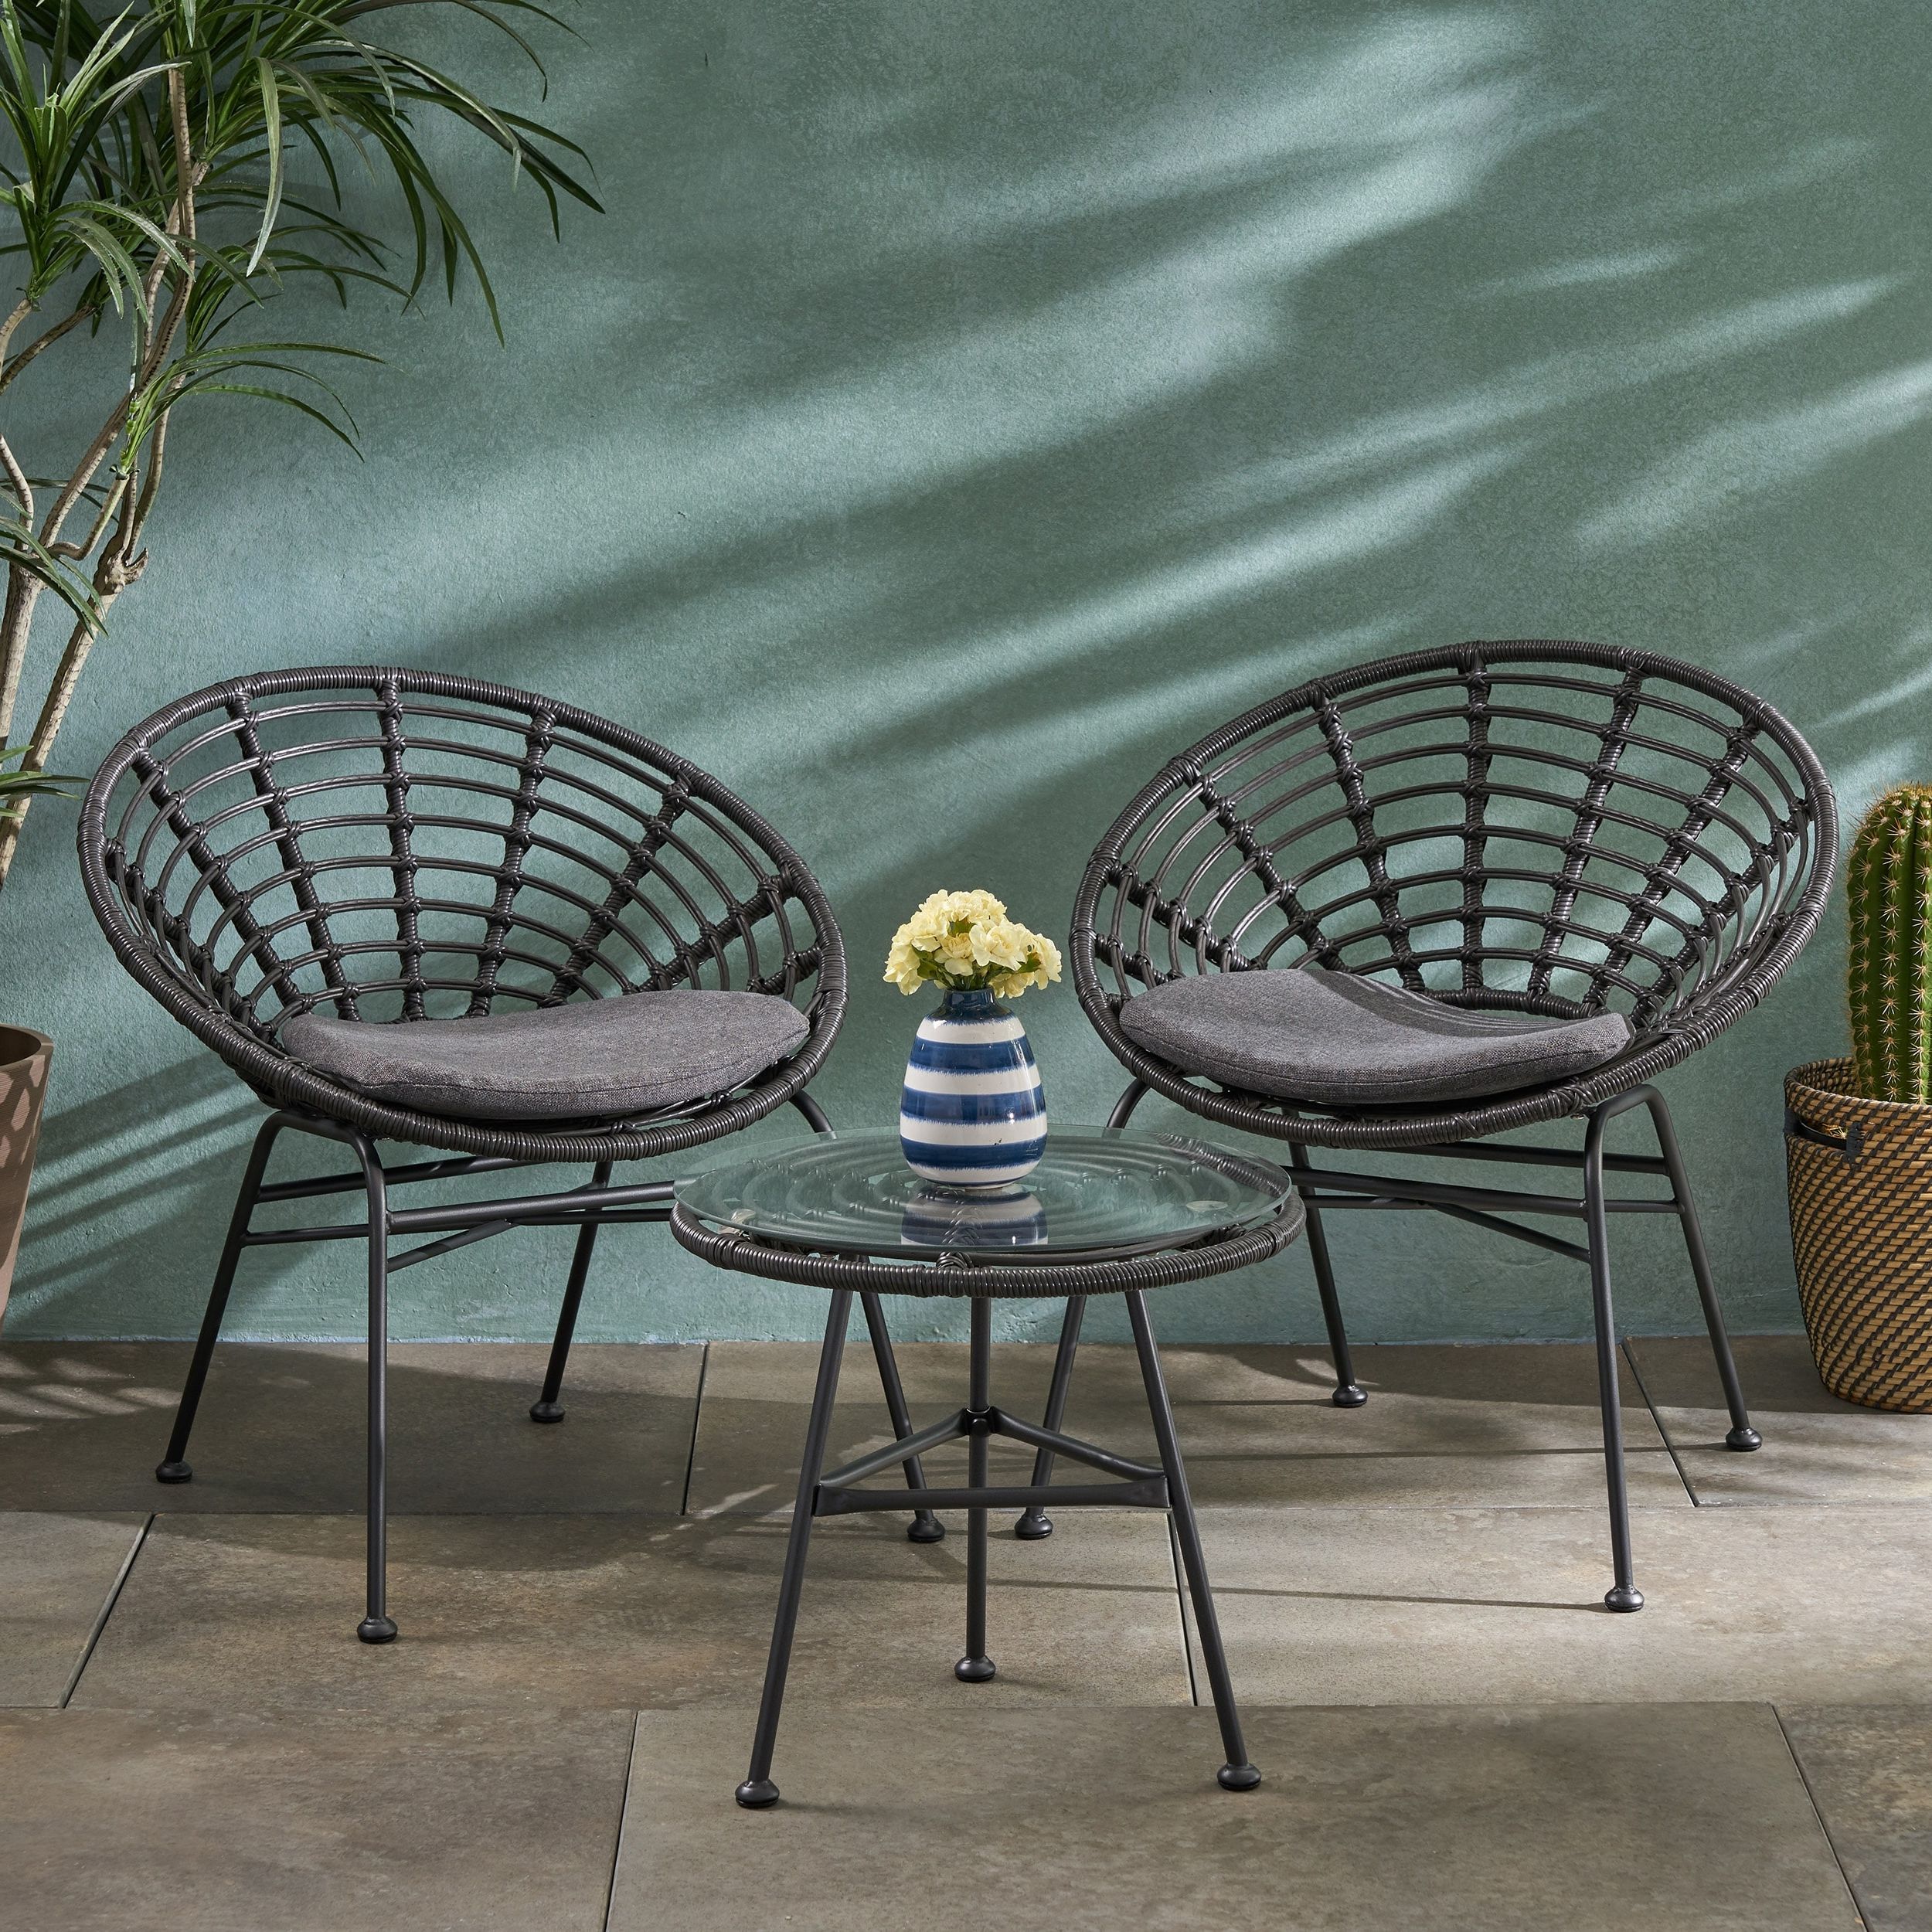 Pigment Outdoor Modern Boho 2 Seater Wicker Chat Set With Side Table Christopher Knight Home – On Sale – – 28422729 Regarding Best And Newest 3 Piece Outdoor Boho Wicker Chat Set (View 9 of 15)